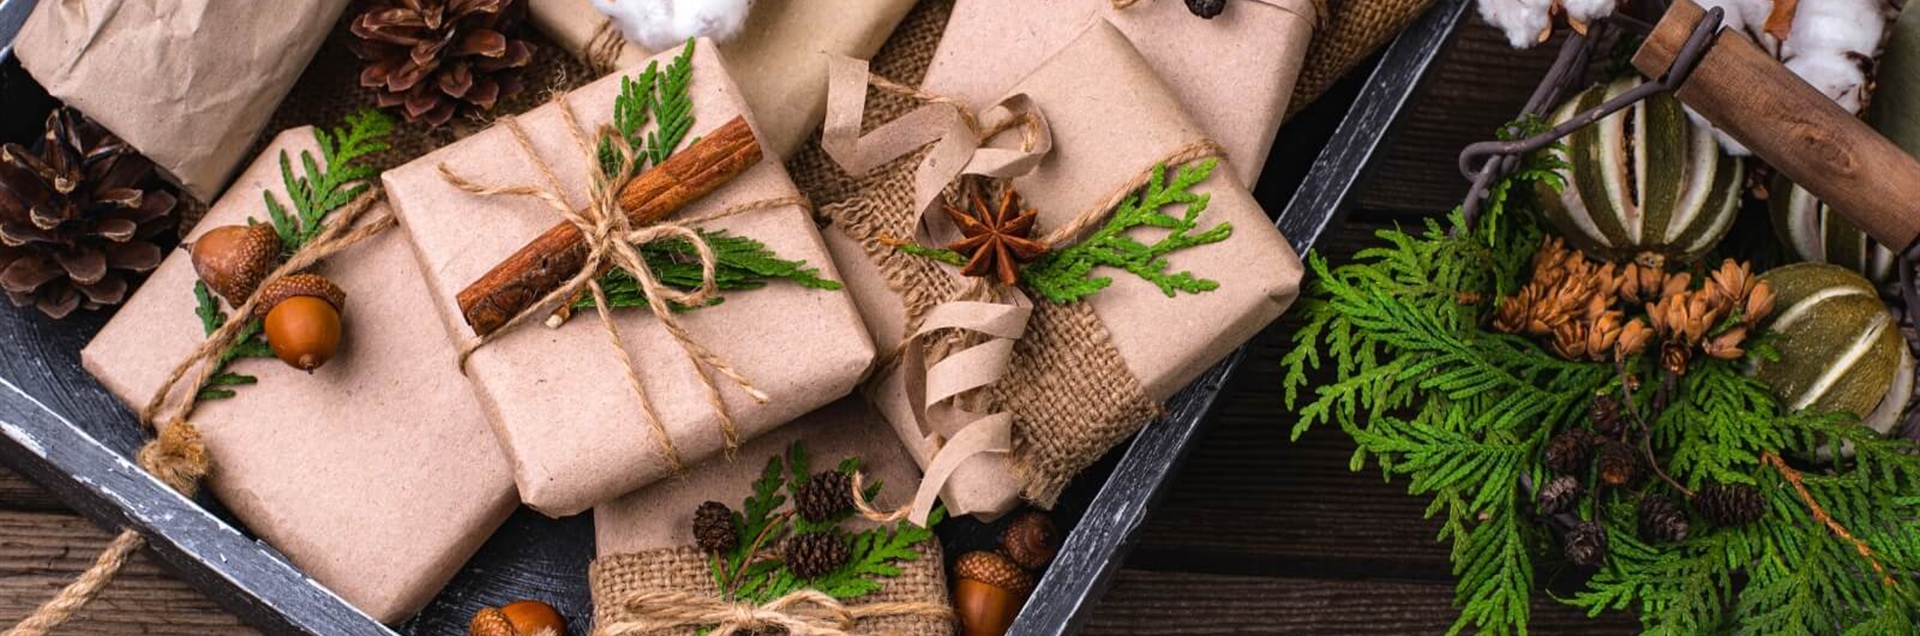 How to wrap Christmas gifts in a sustainable way